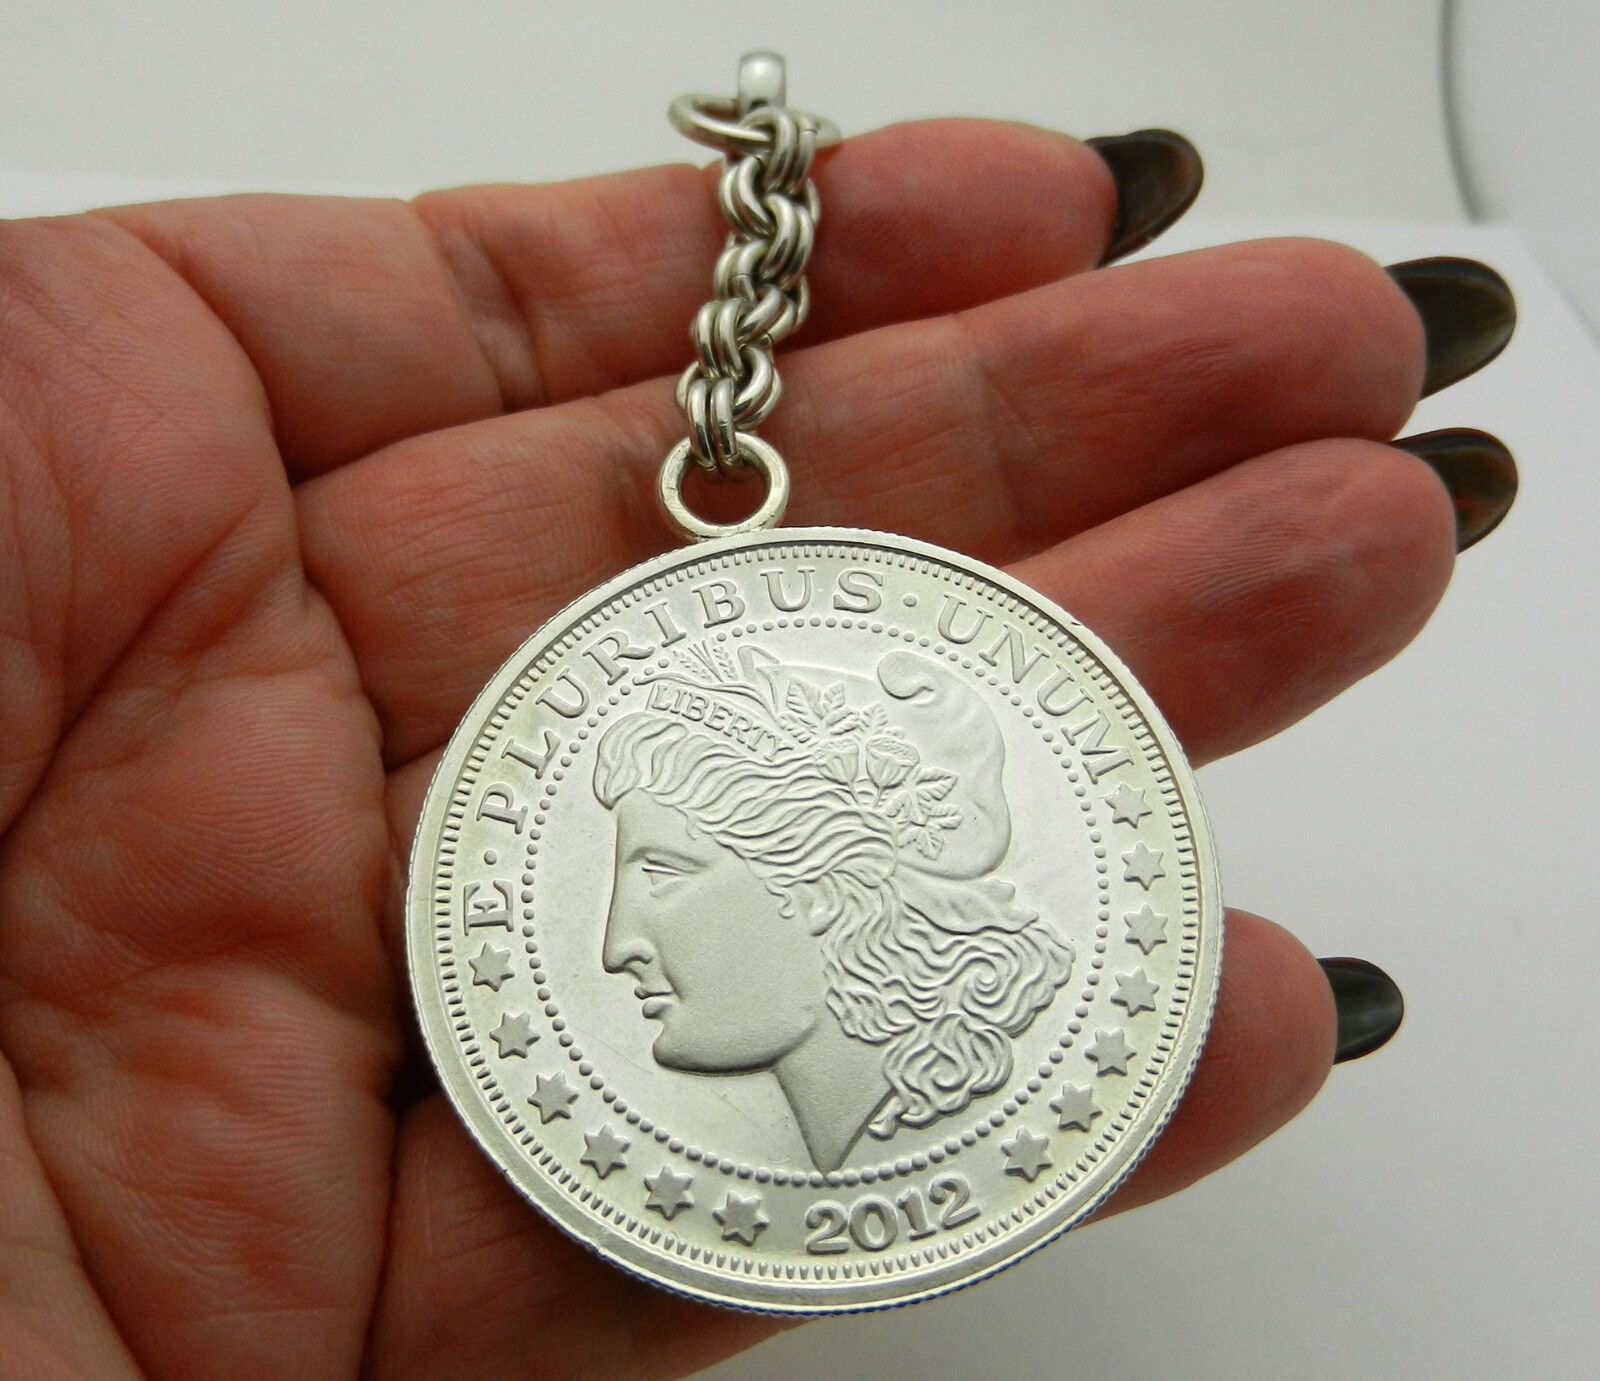 E PLURIBUS UNUM 2012 ONE Troy UNCE .999 silver COIN KEYCHAIN